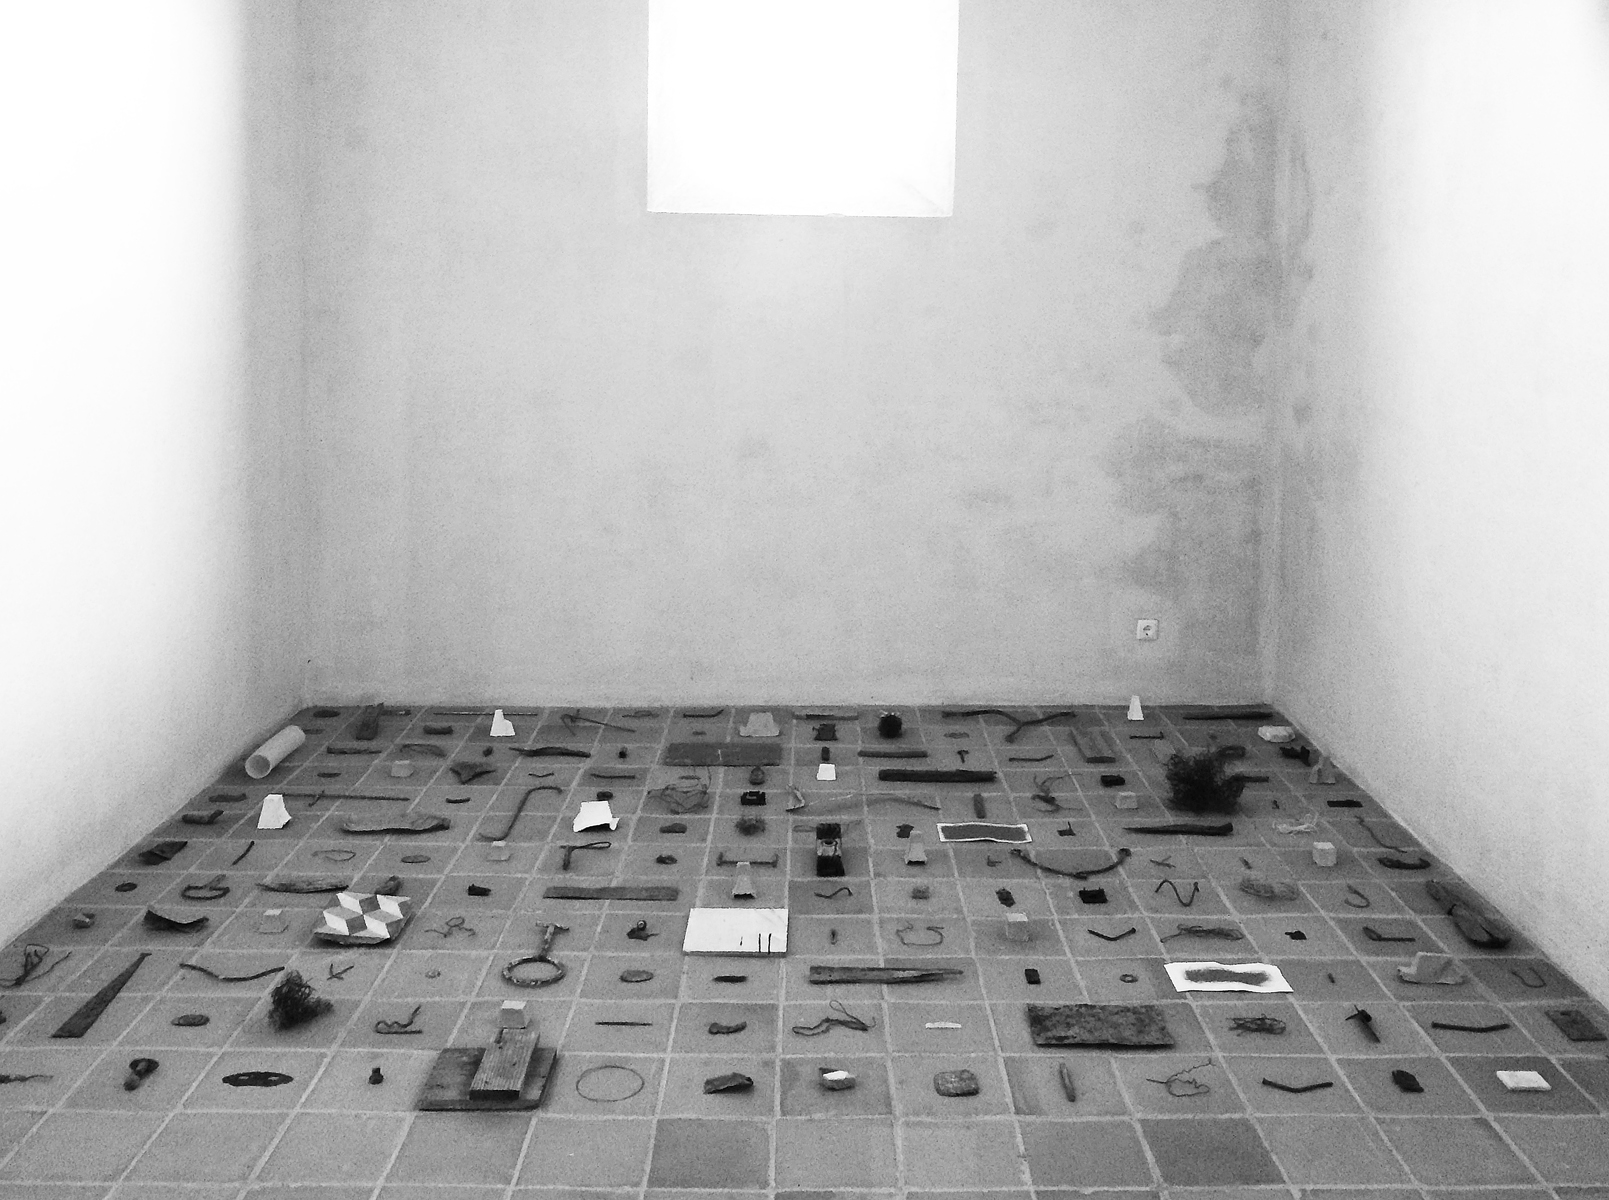 Objects arranged in a grid on a tile floor in an otherwise empty, monastic space.